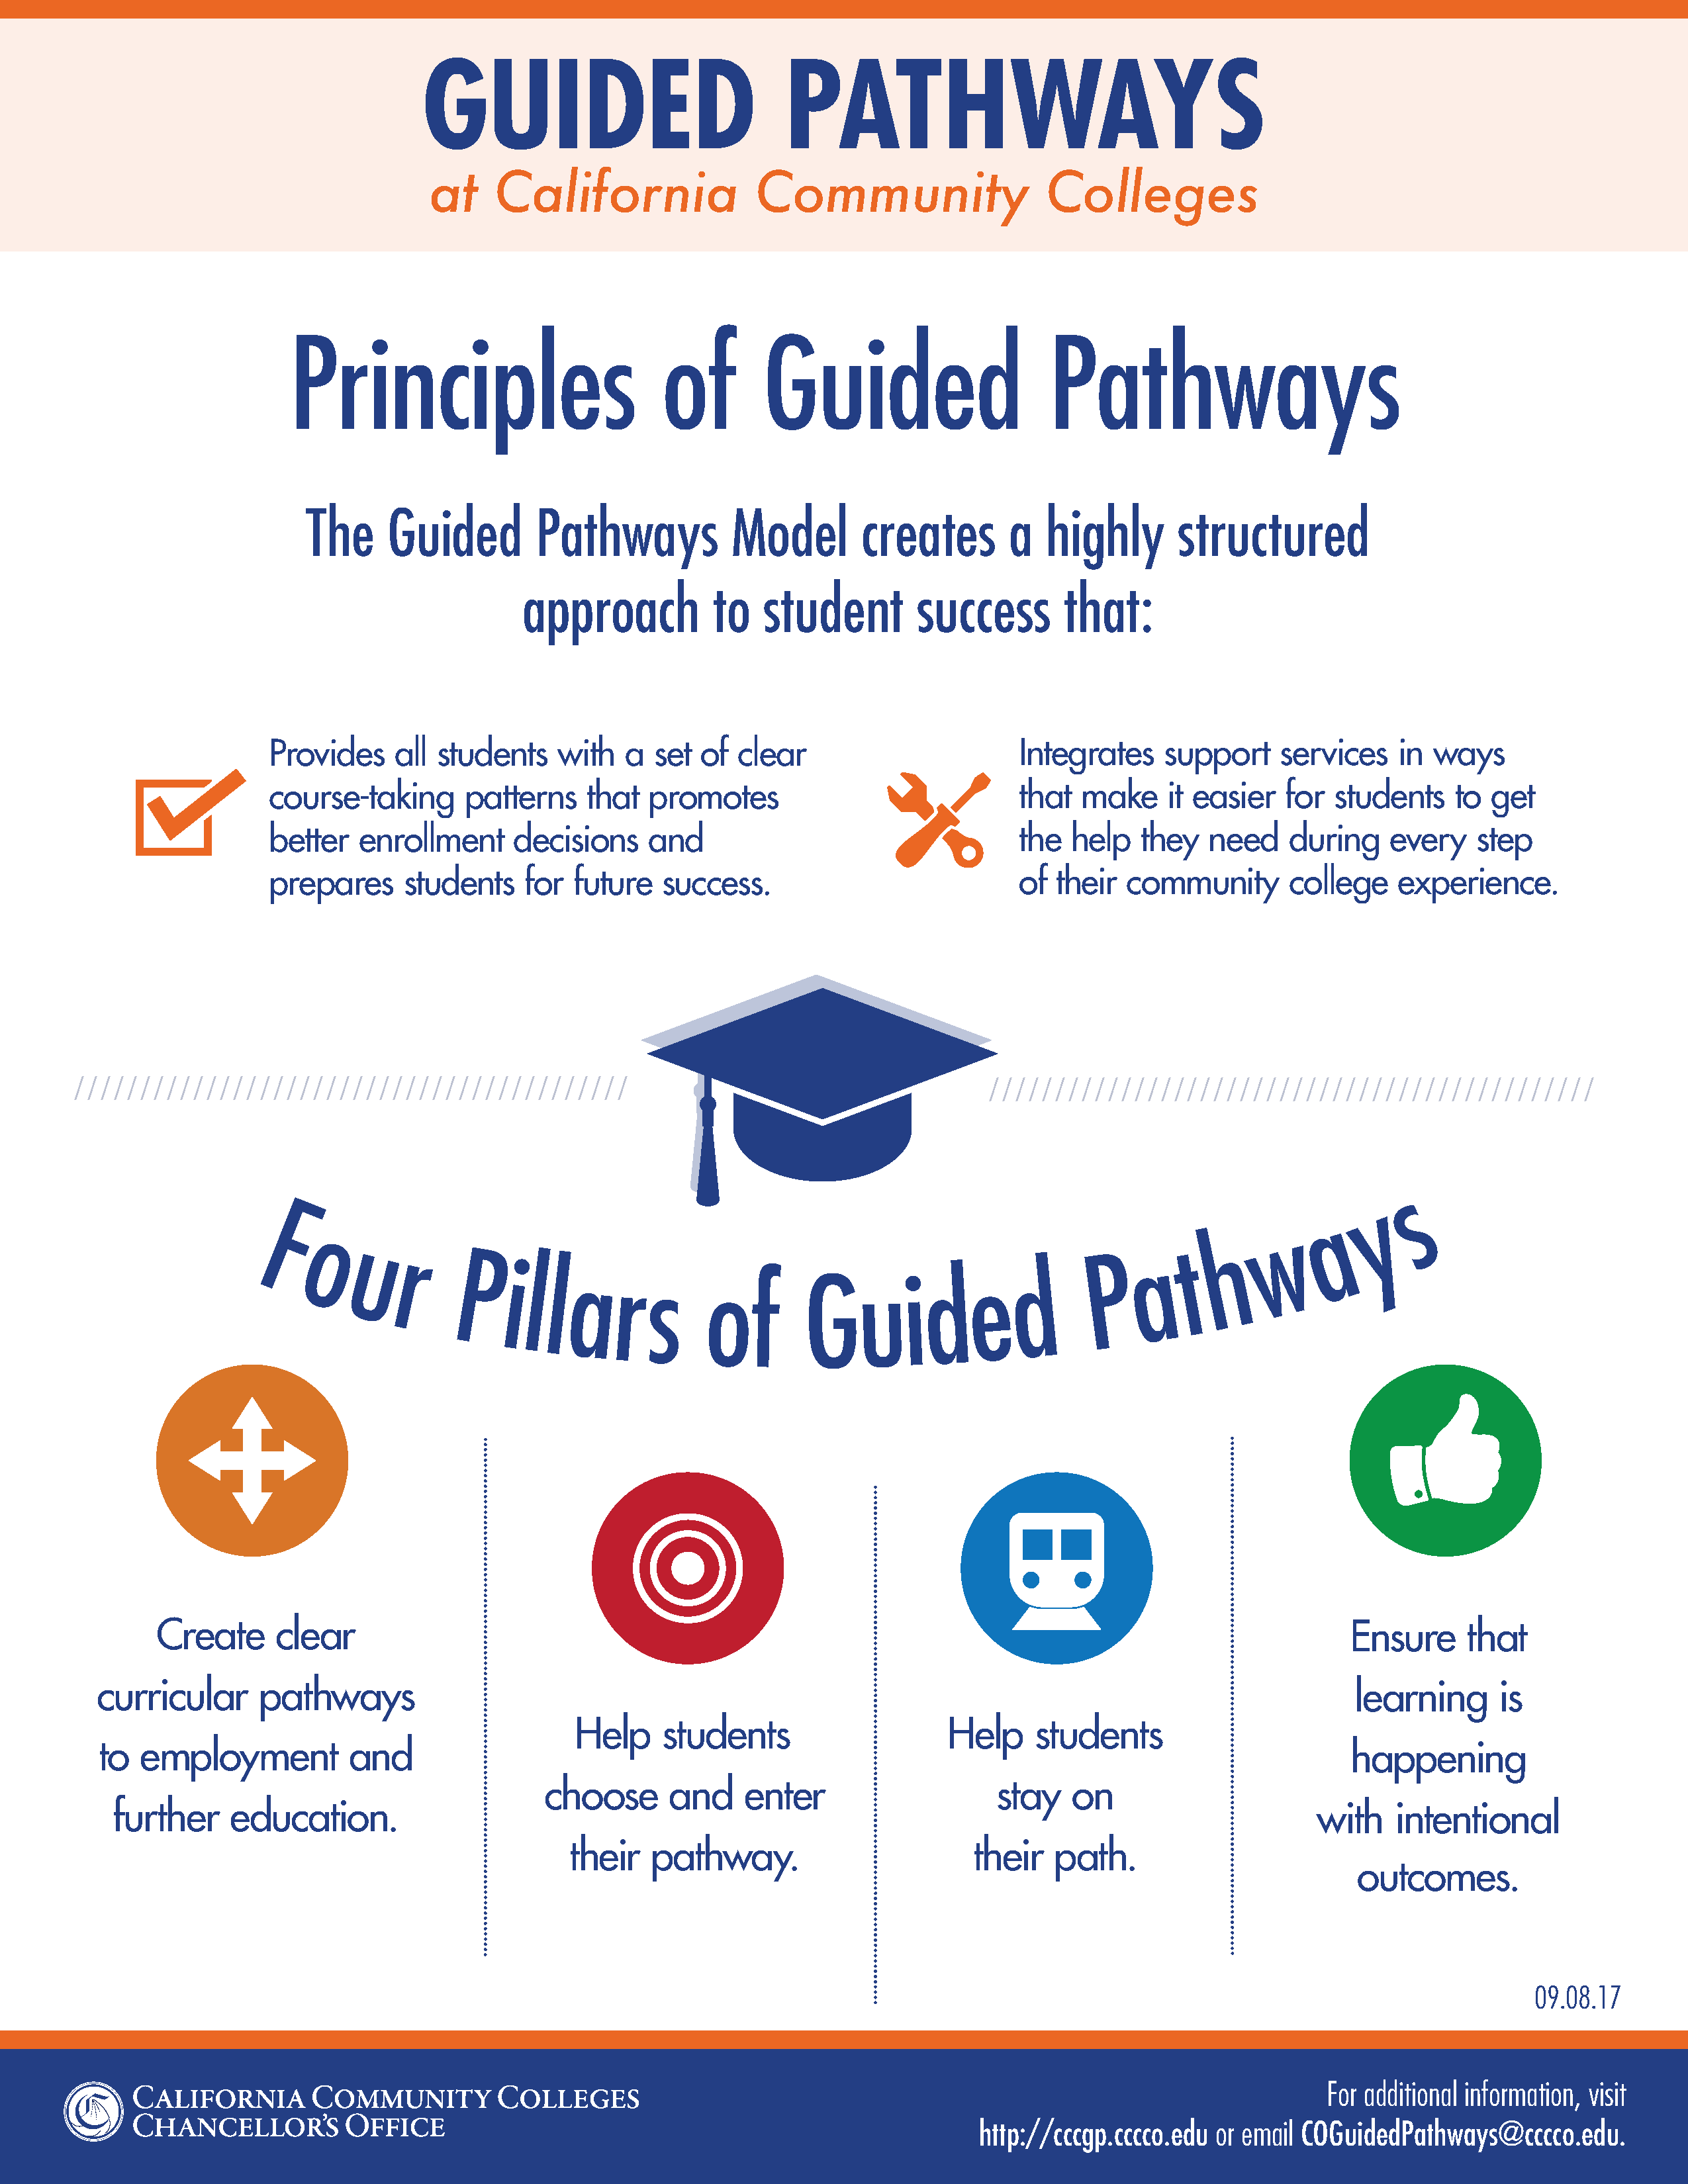 California Community Colleges - Principles of Guided Pathways